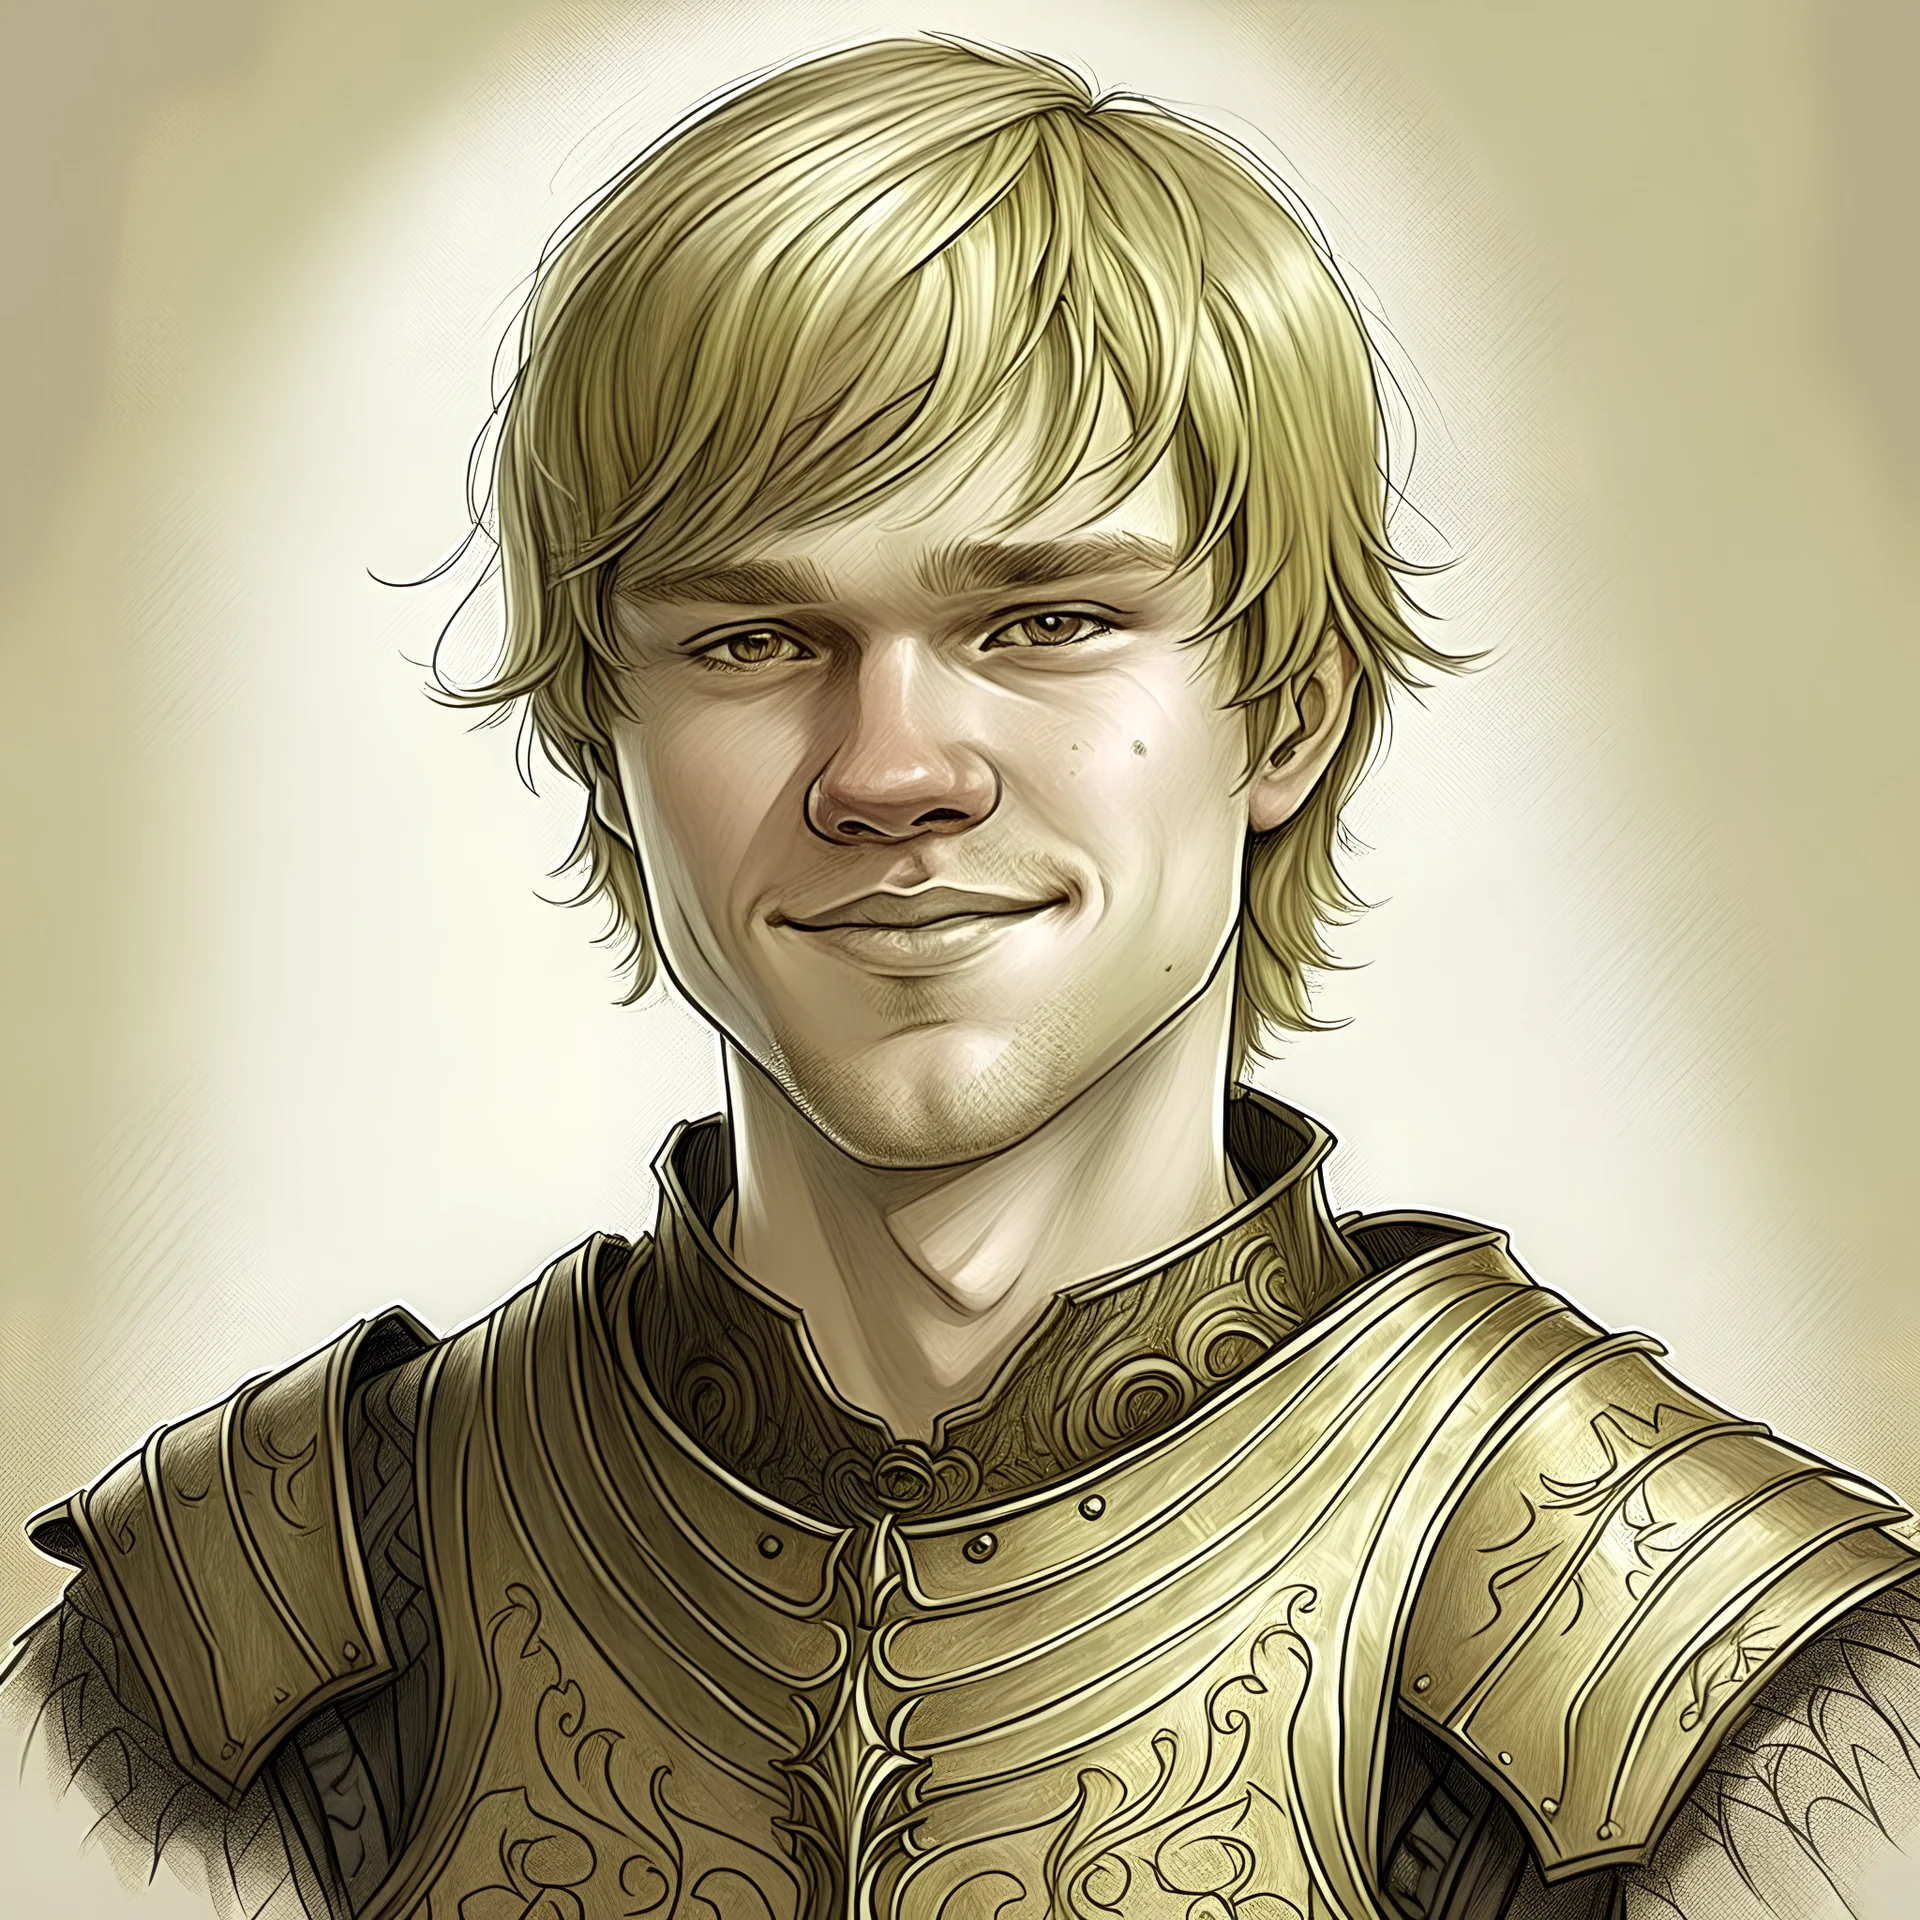 fantasy handdrawn, male in end thirties, 190cm in hight, in light armor, dark blonde bowl cut, a bit of an idiot but kindhearted, small smile